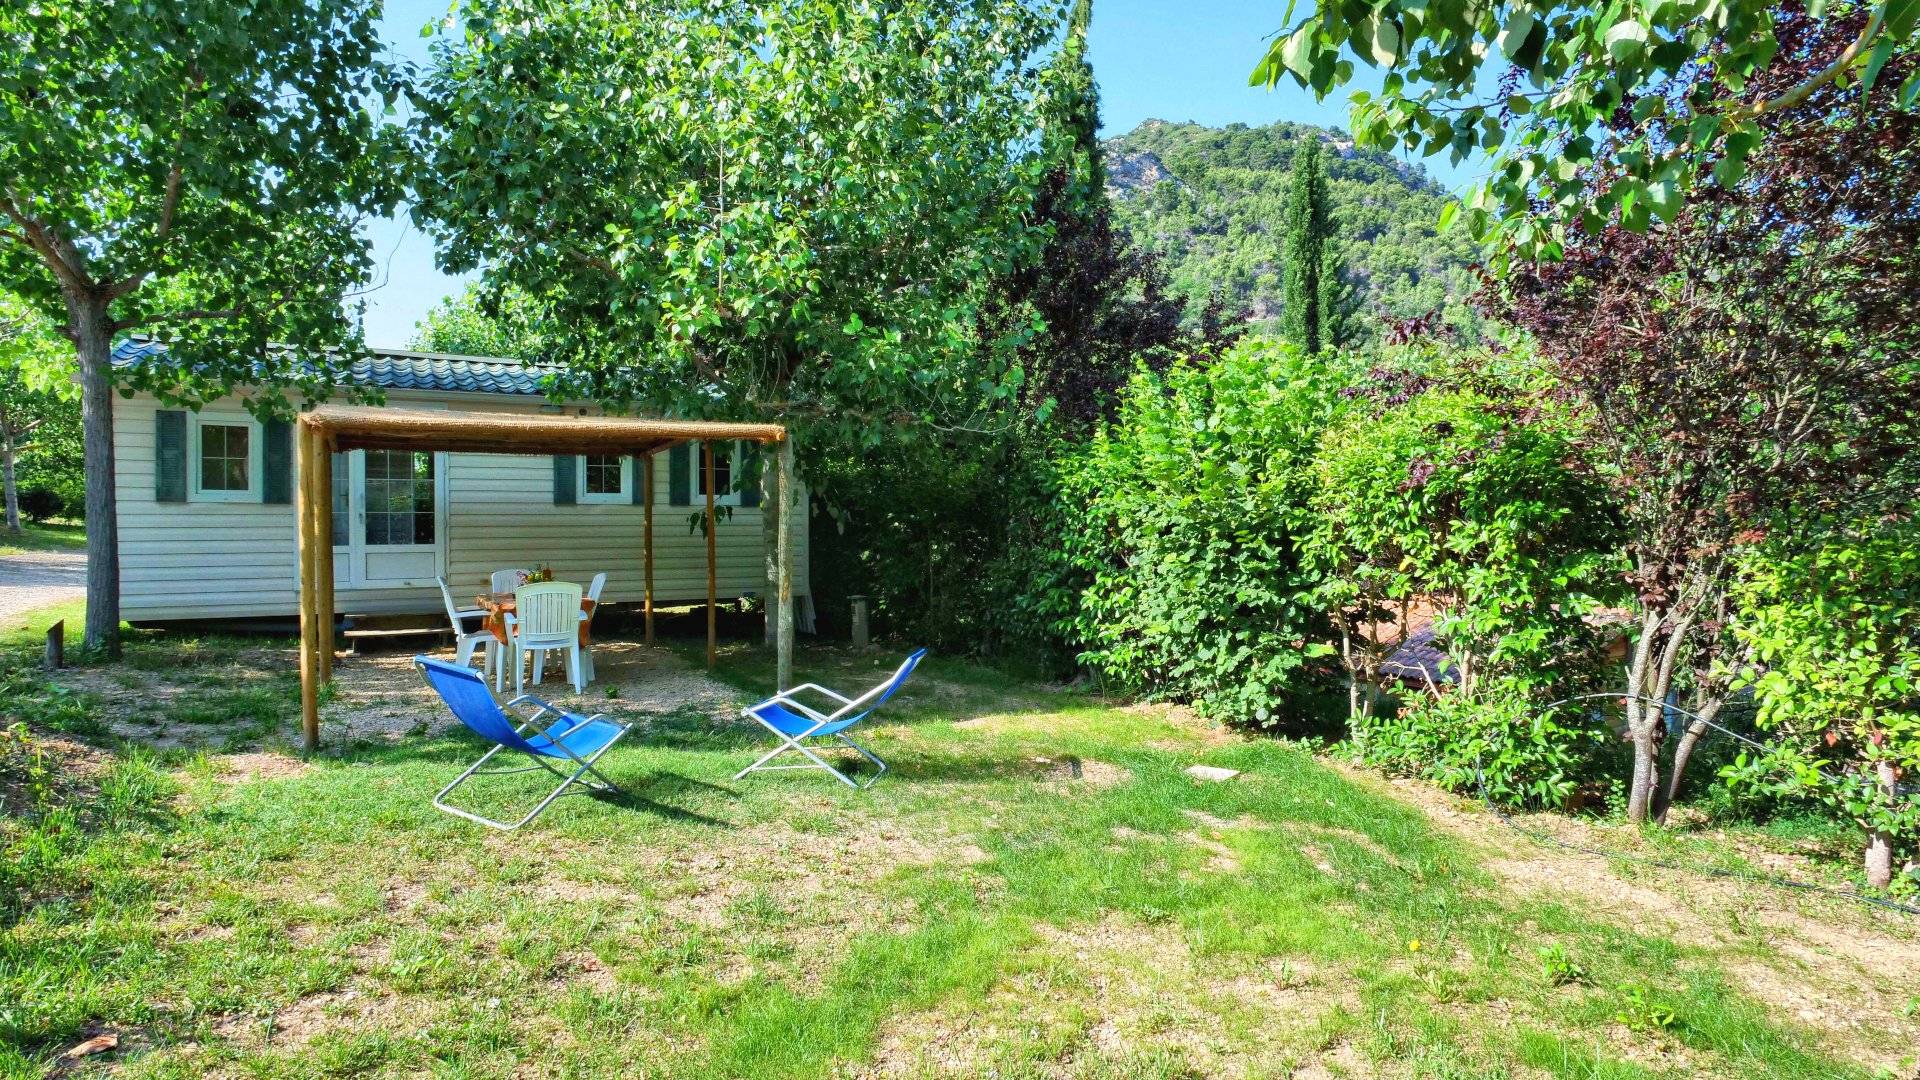 Mobil-Home COLORADO 25m²  / On the campsite terraces, spacious pitches / 2 bedrooms, 4 pers.